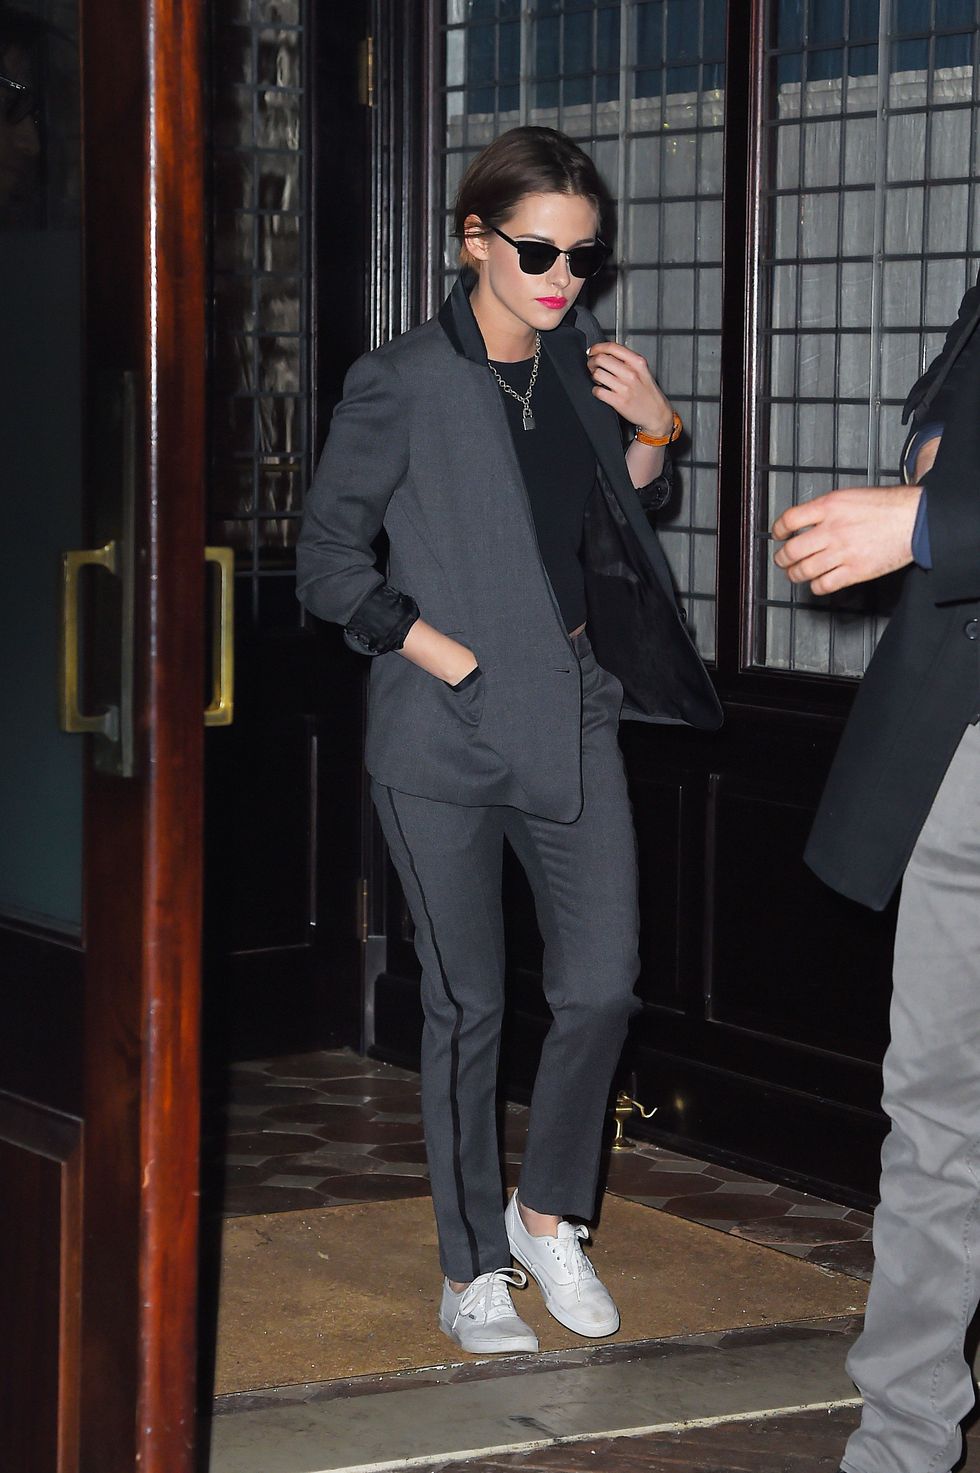 Kristen Stewart wearing a suit and trainers